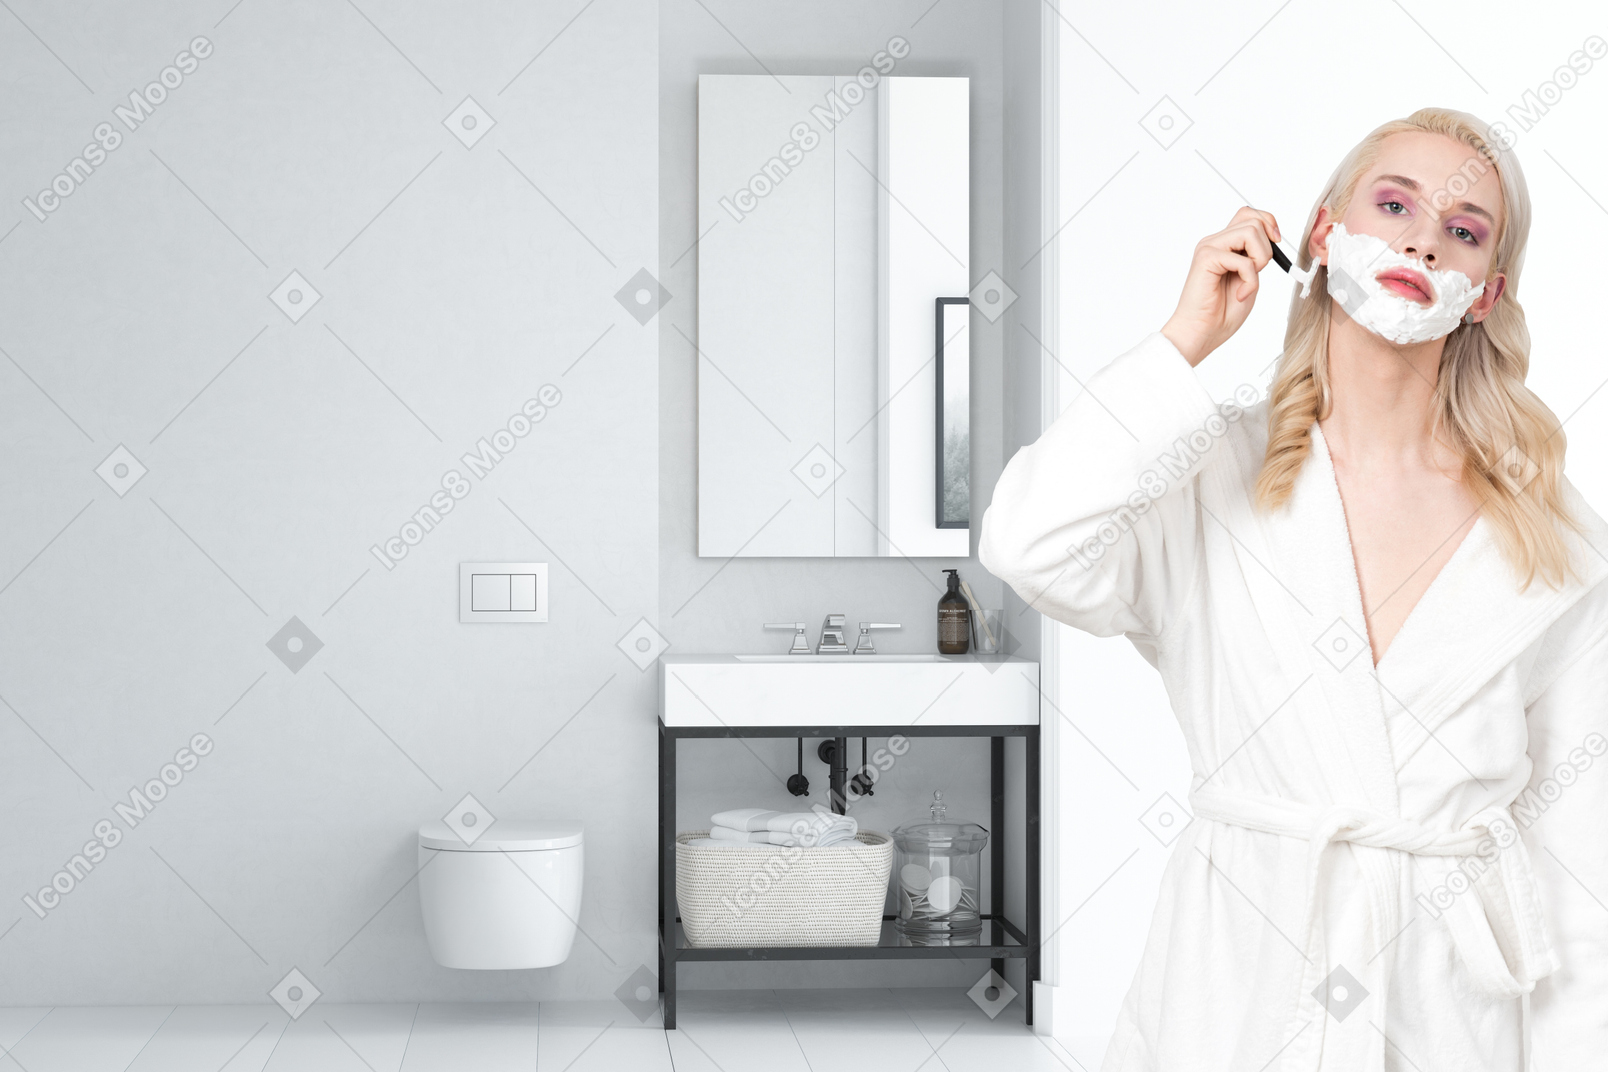 Person shaving their face in the bathroom